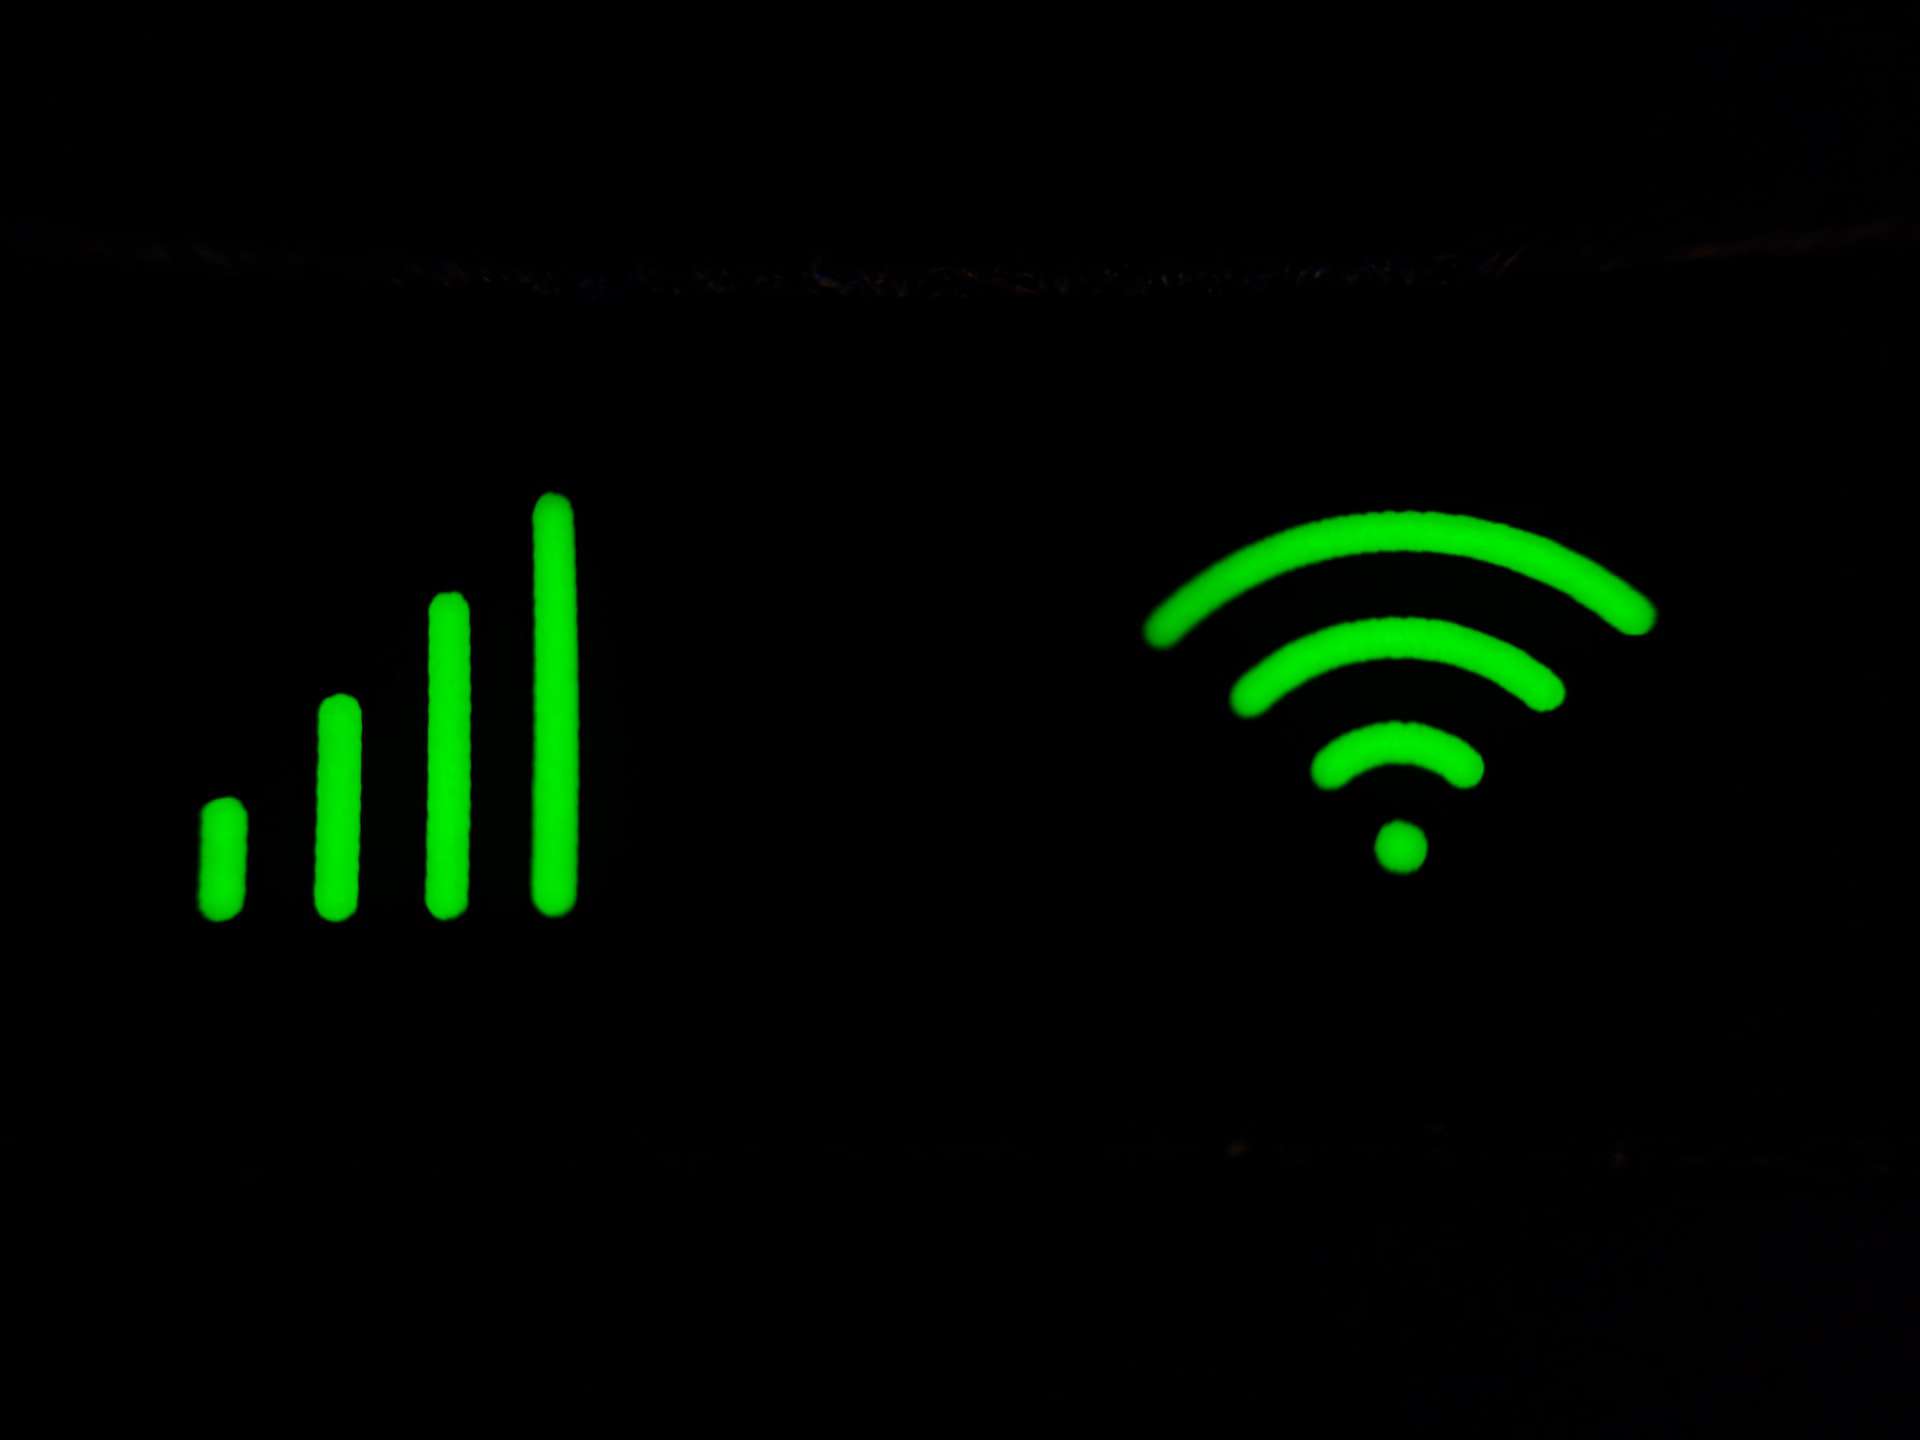 A connection strength and router connection indicator